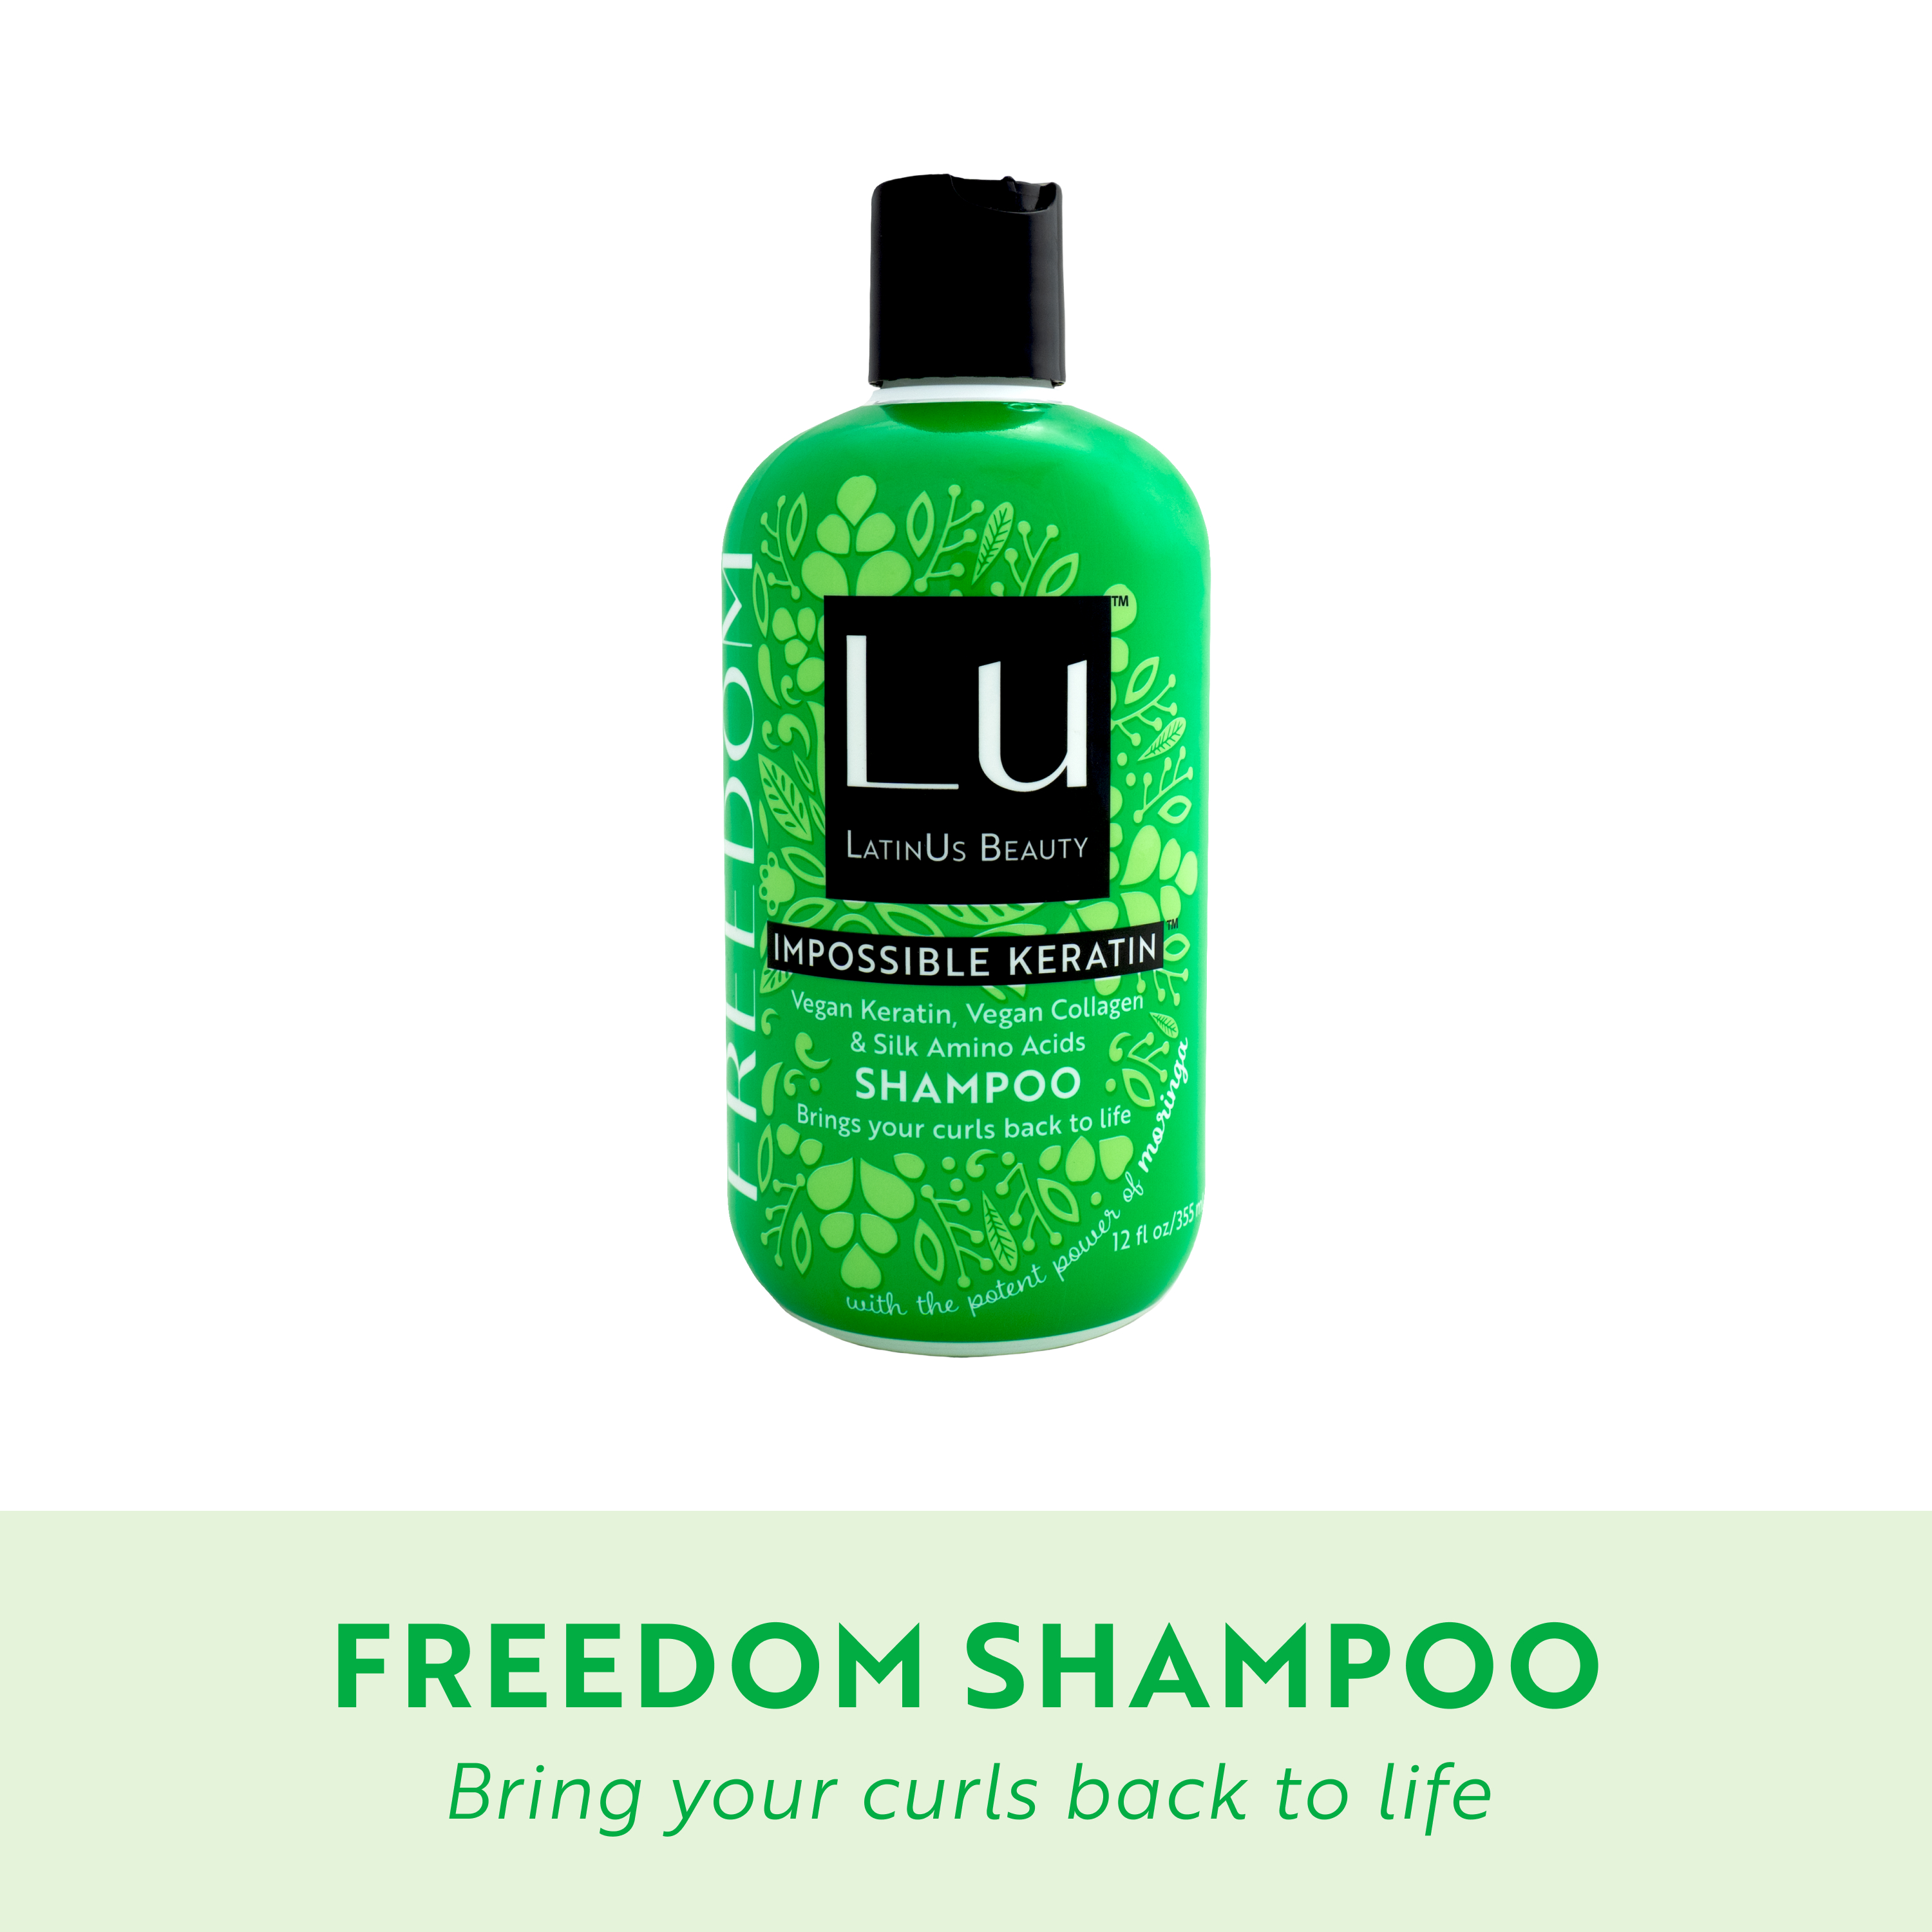 LU LatinUs Beauty Freedom Curl Enhancing Shampoo with Impossible Keratin & Natural Oils, for All Hair Types,12 oz - image 1 of 10